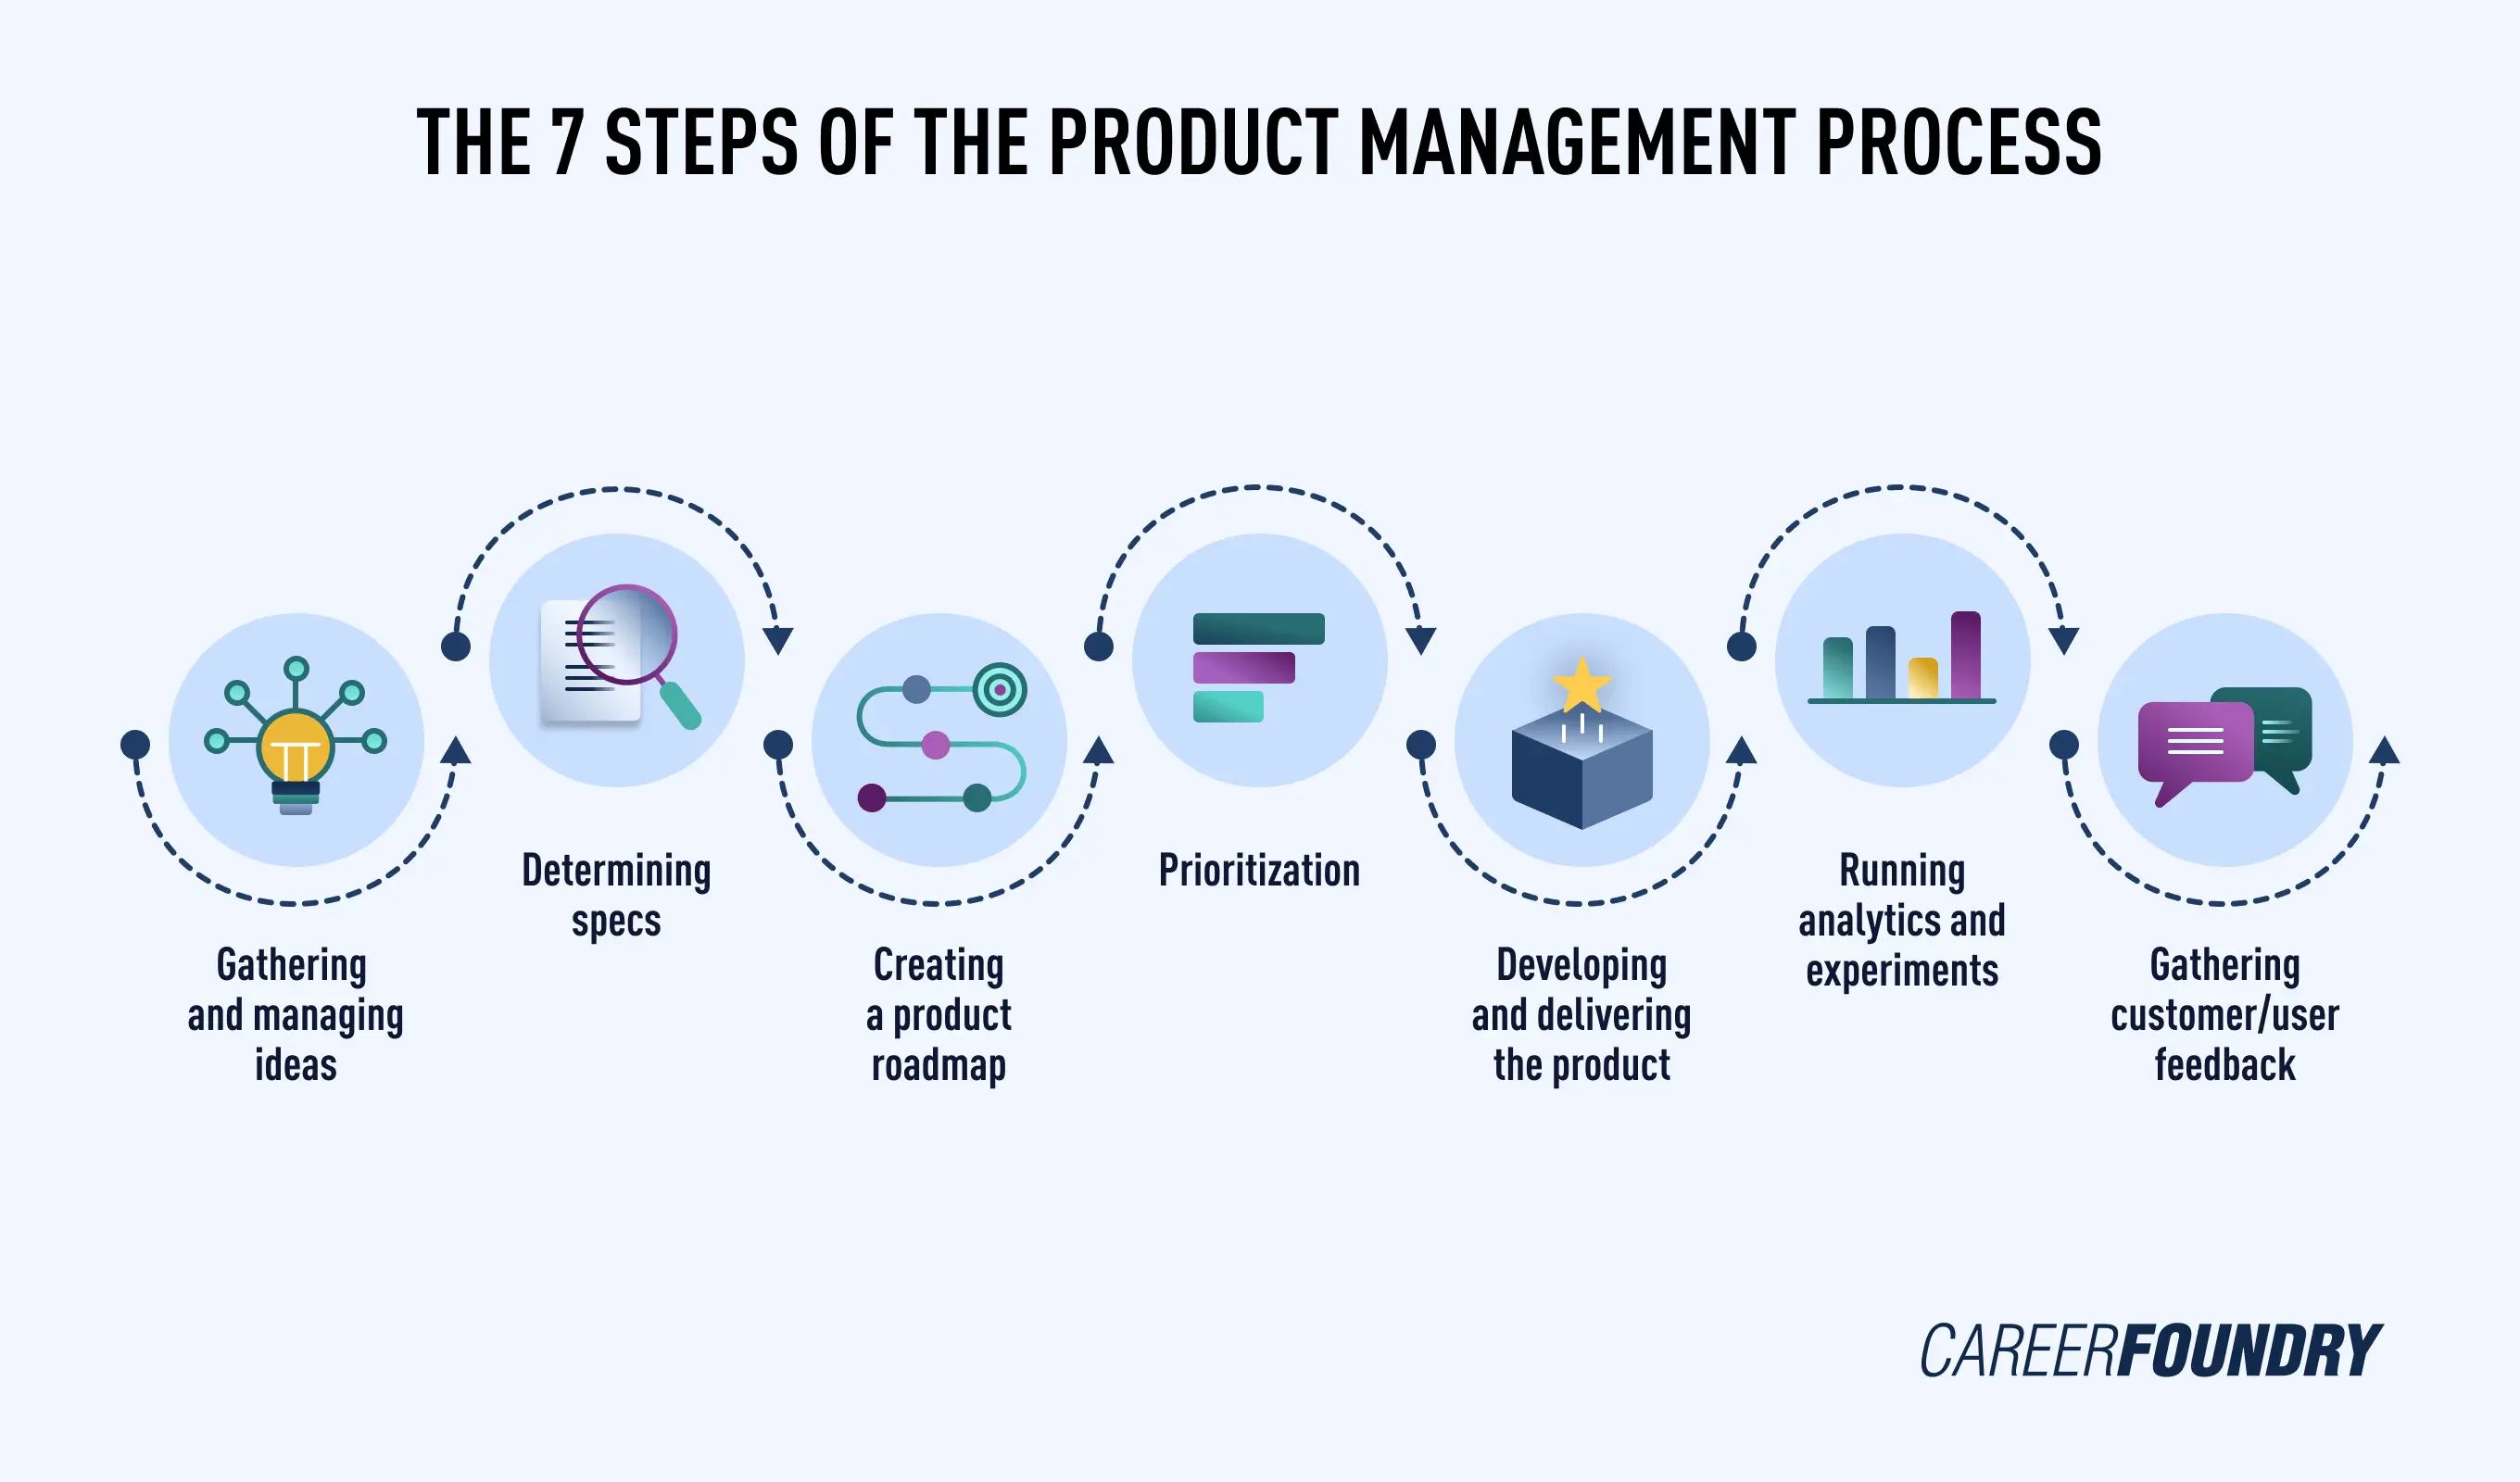 Graphic illustration of the 7 steps of the product management process.